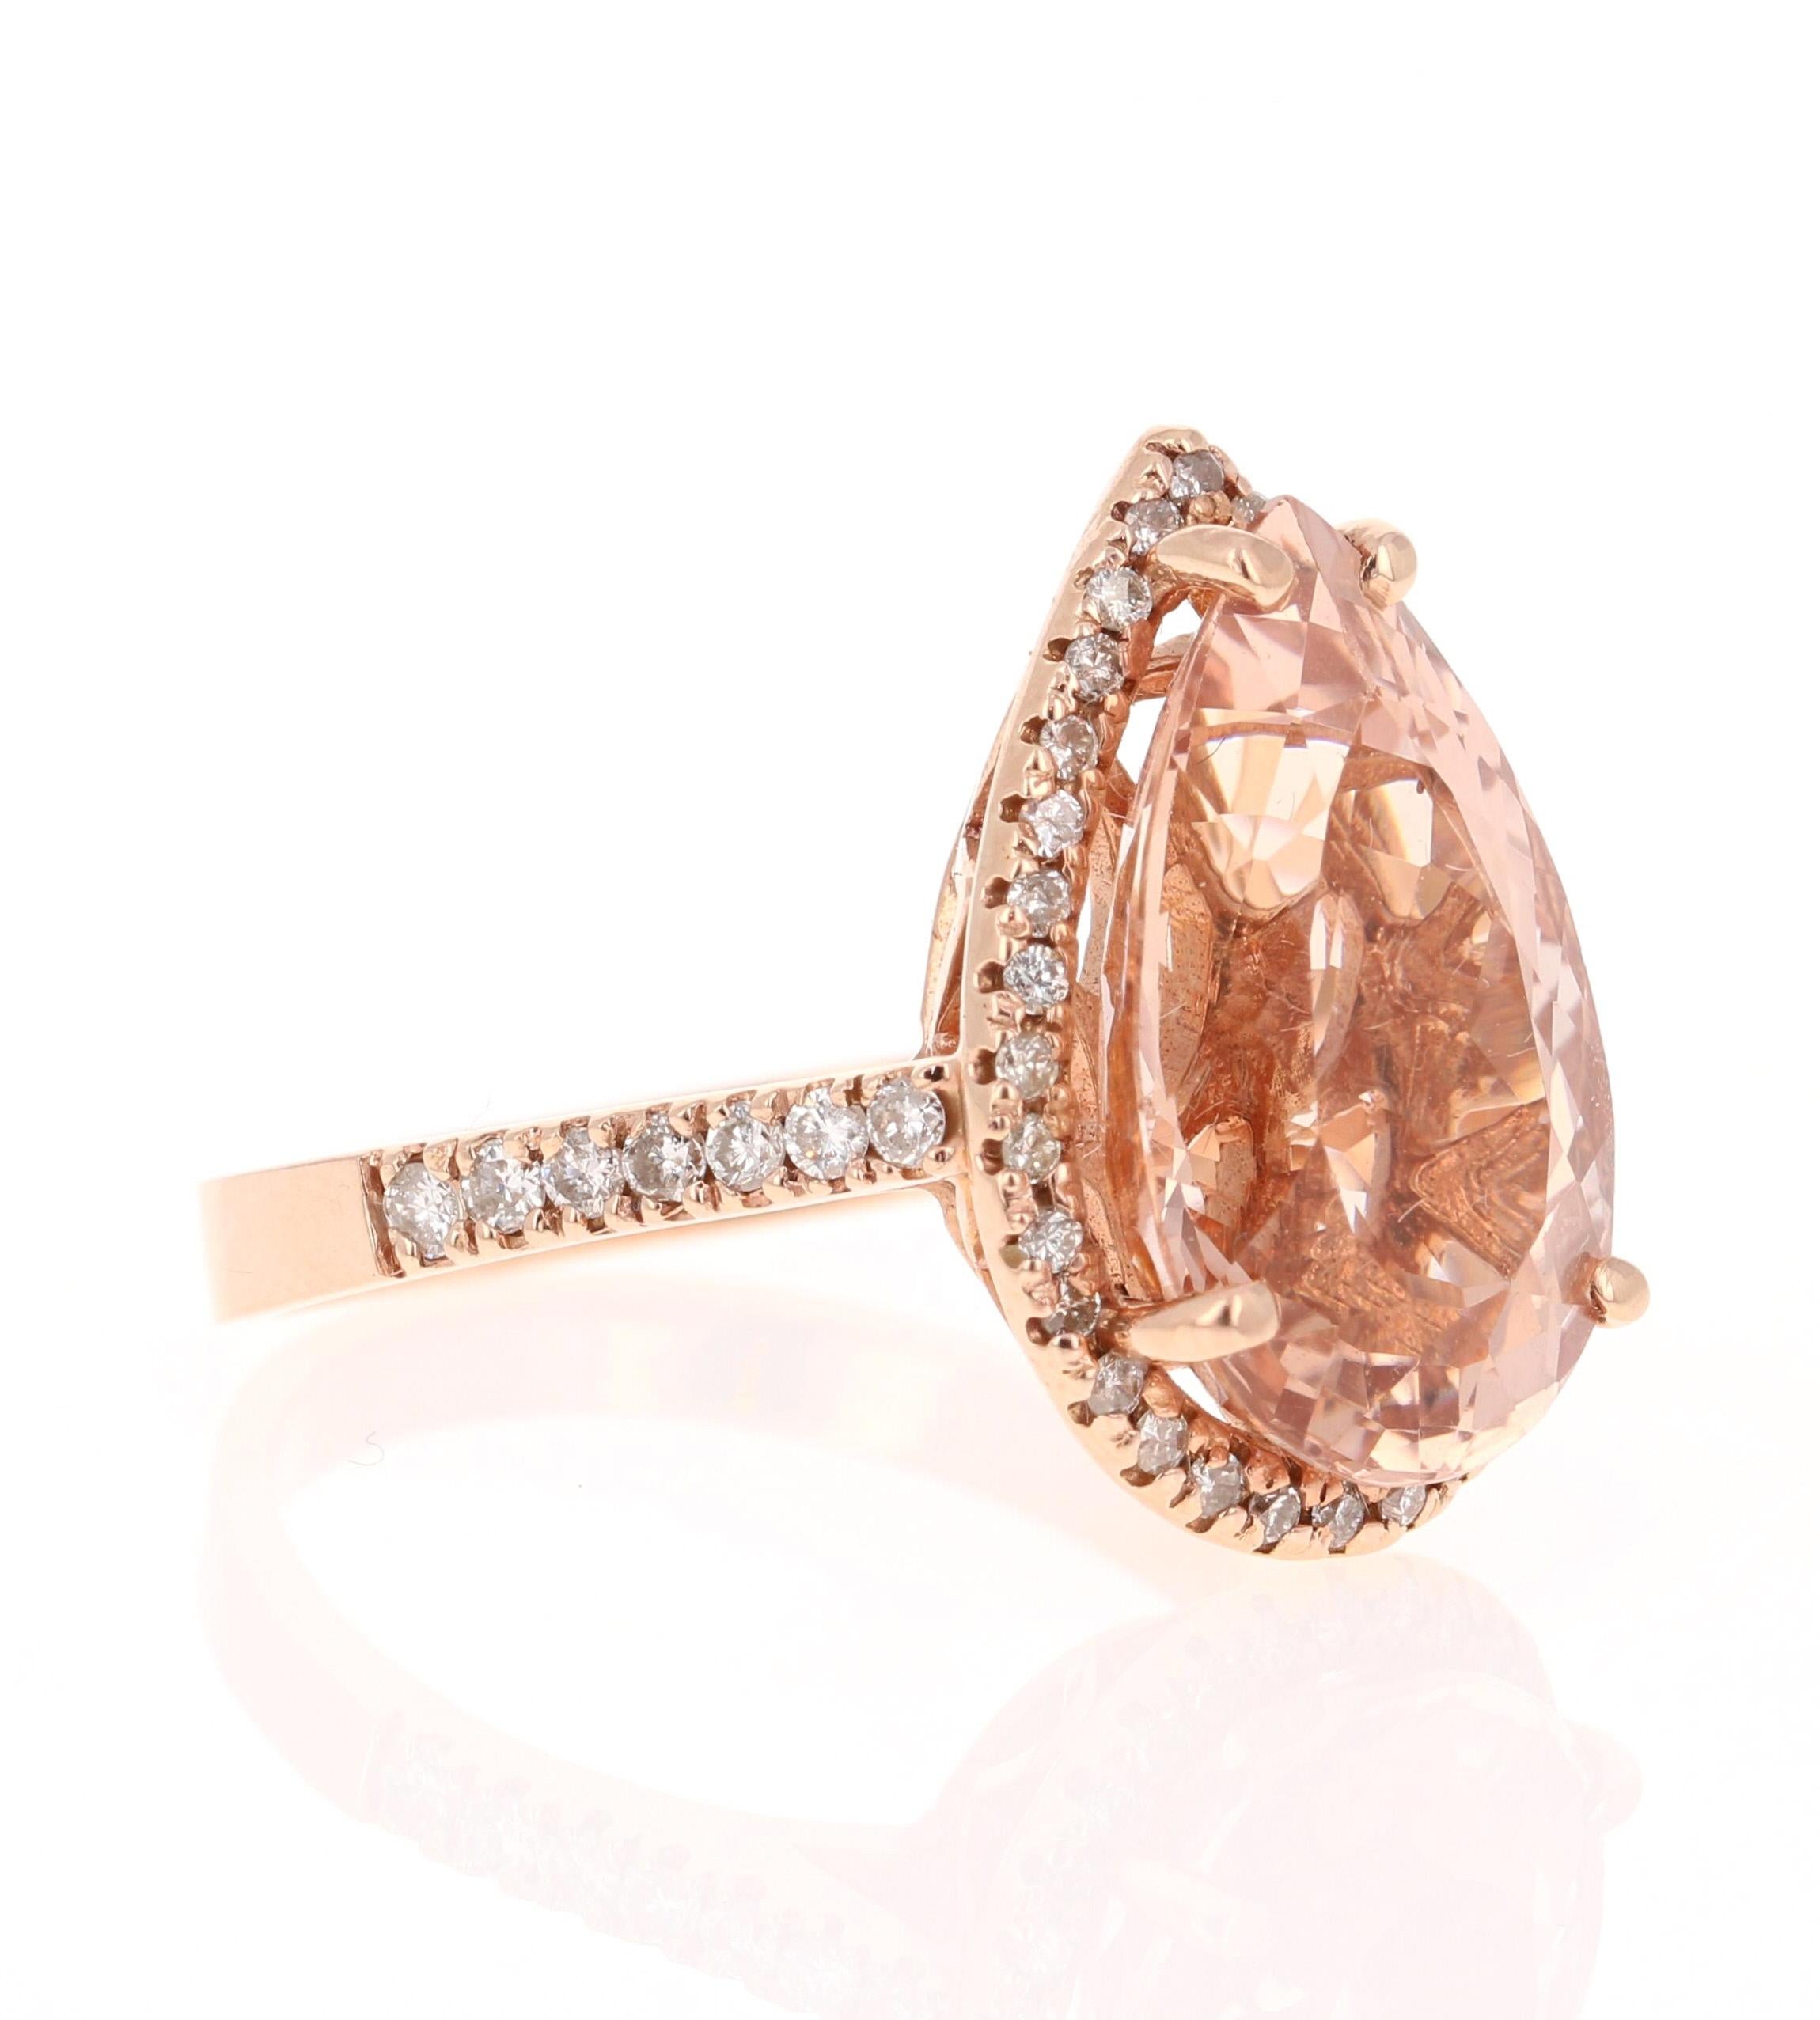 Gorgeous and Unique Morganite Diamond Ring! 

This Morganite ring has a stunning 7.78 Carat Pear Cut Morganite and is surrounded by a halo of 46 Round Cut Diamonds that weigh 0.46 Carats.  The diamonds have a clarity and color of VS-H. The total